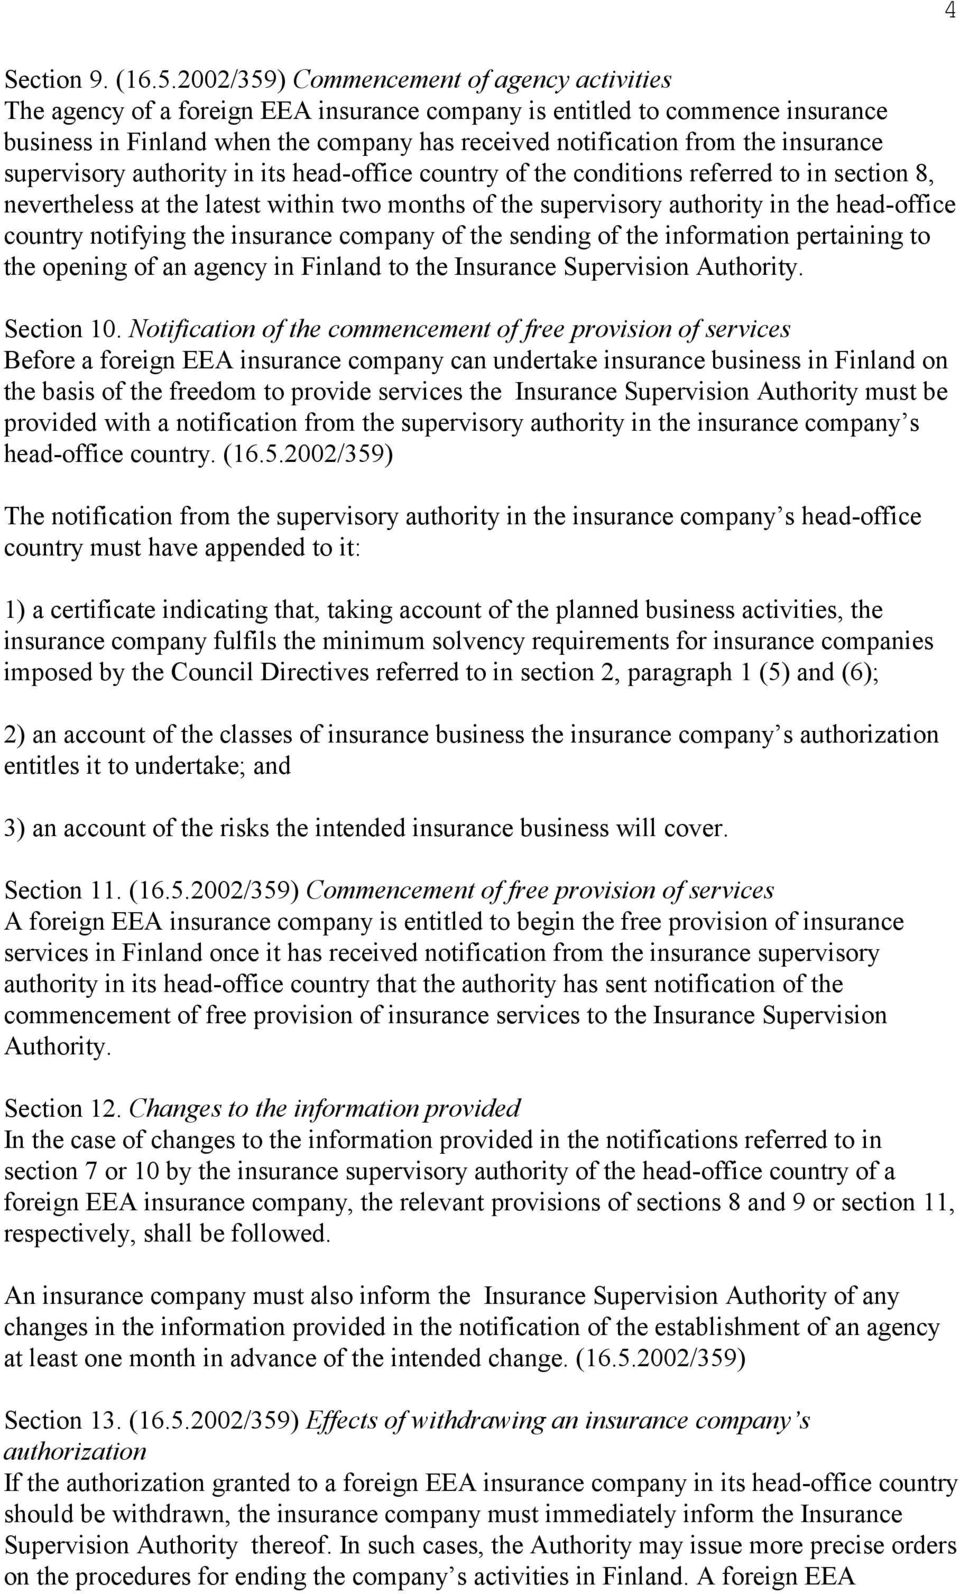 insurance supervisory authority in its head-office country of the conditions referred to in section 8, nevertheless at the latest within two months of the supervisory authority in the head-office